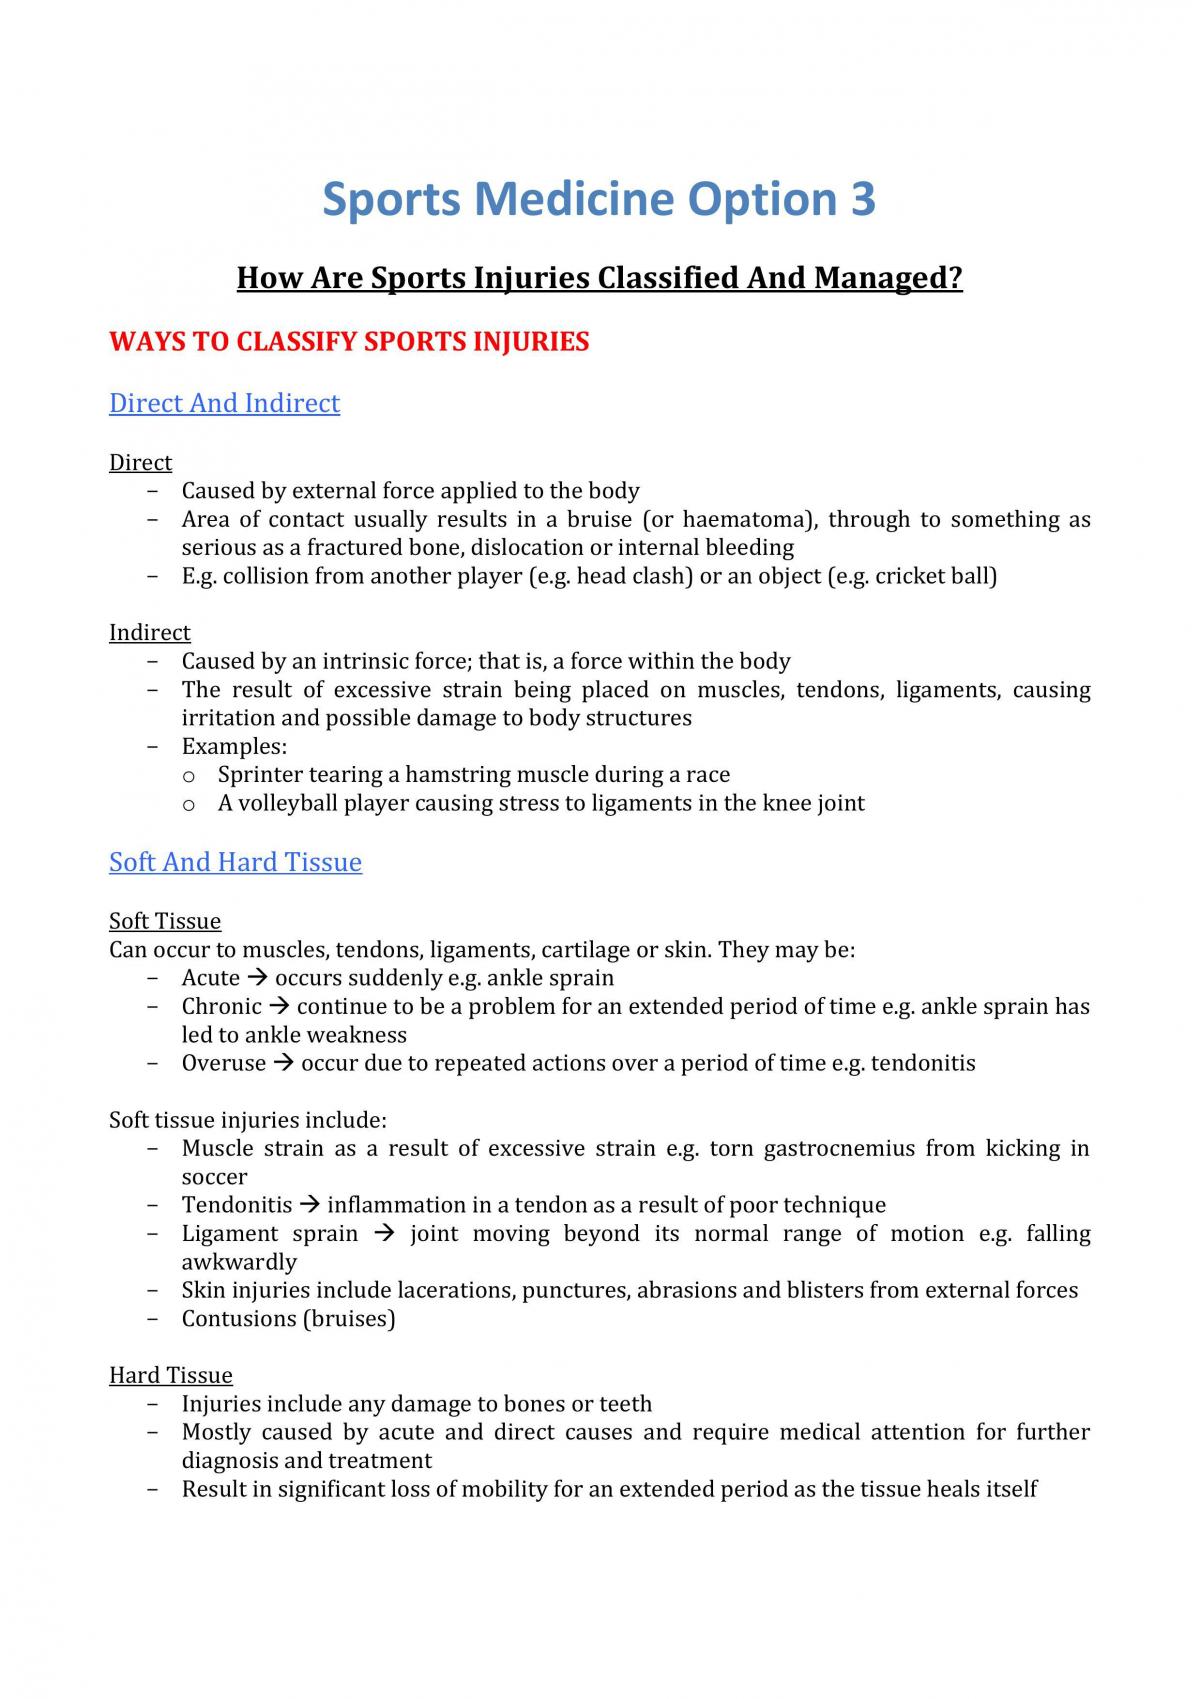 research papers about sports medicine